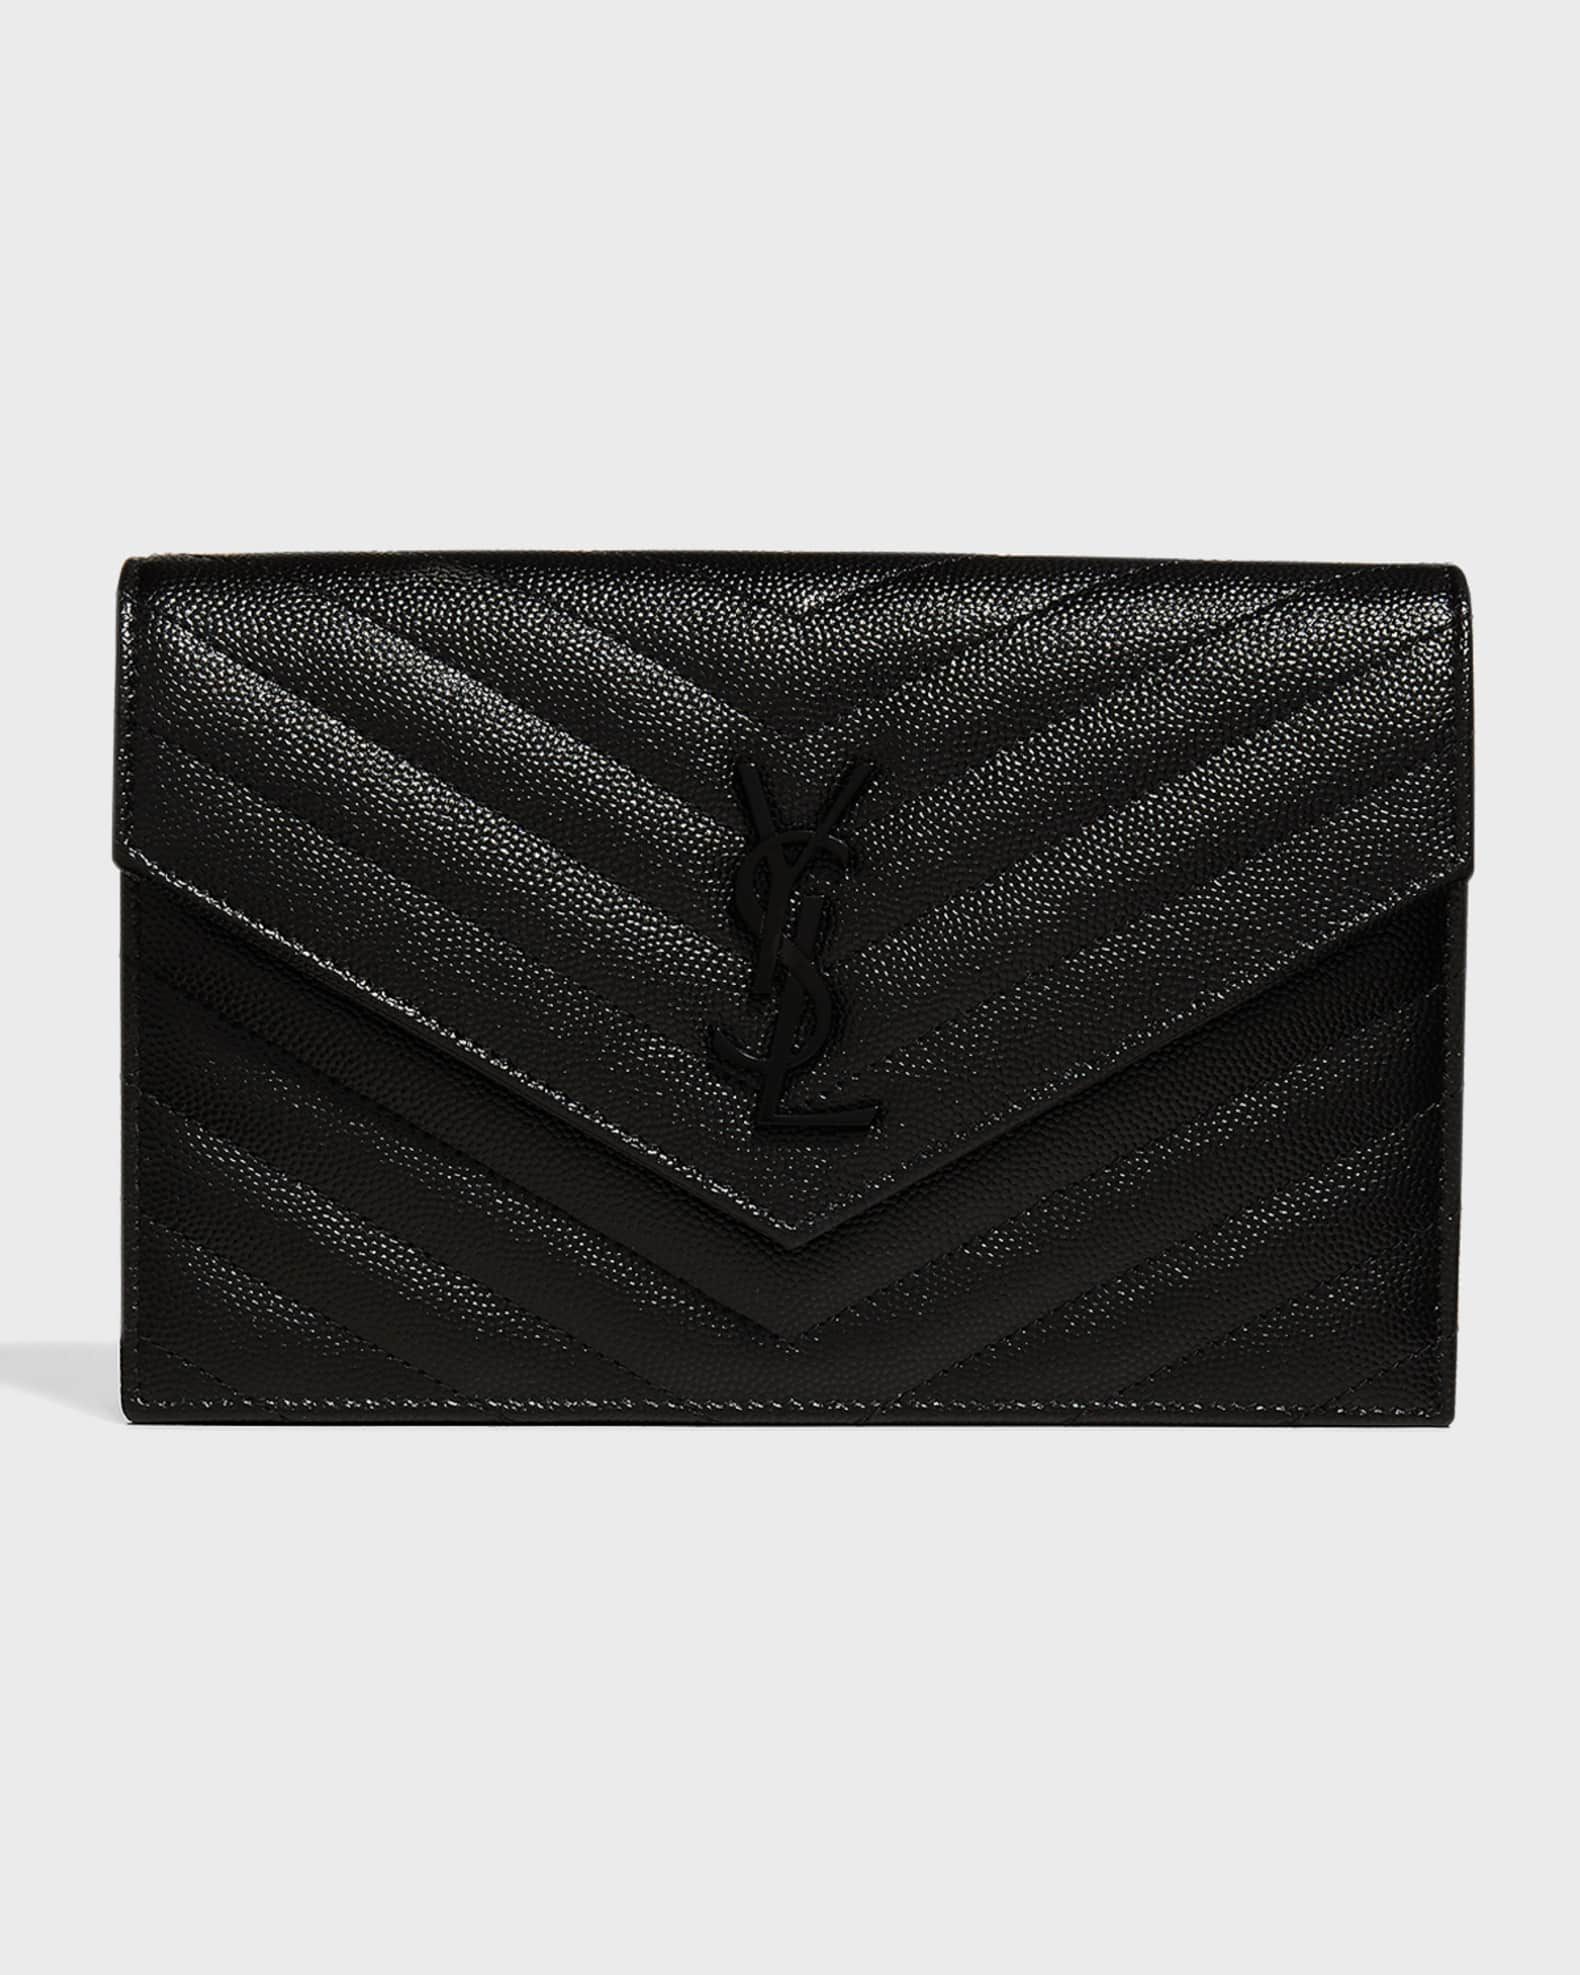 YSL Monogram Small Wallet on Chain in Grained Leather | Neiman Marcus